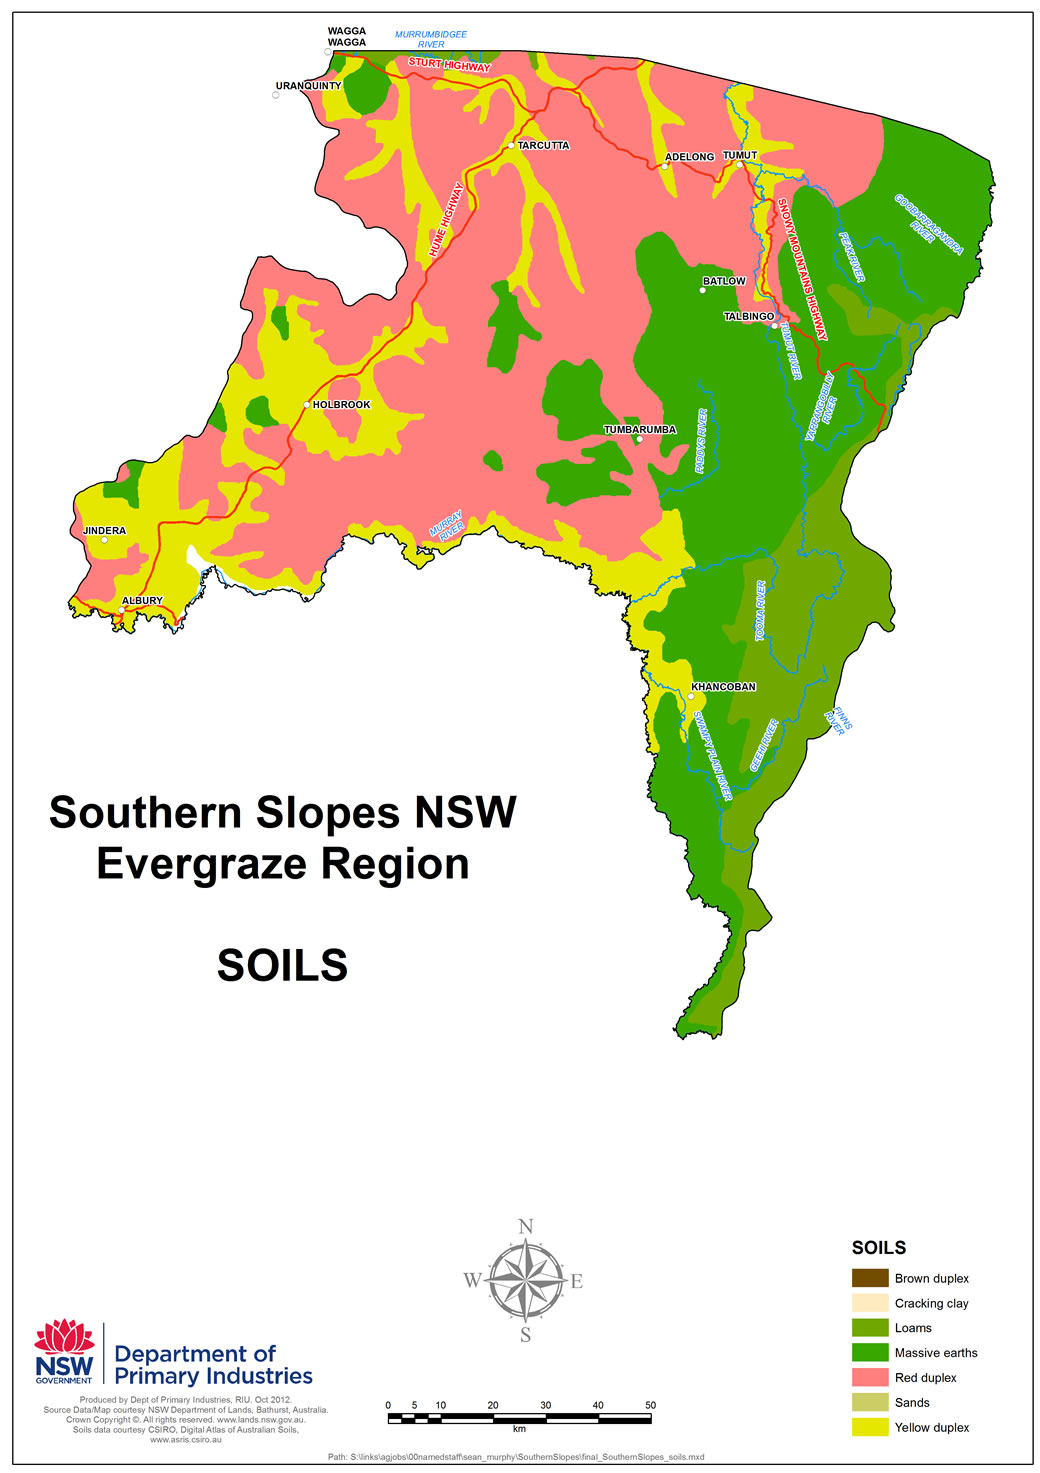 Figure 2. Soils of Southern Slopes NSW.